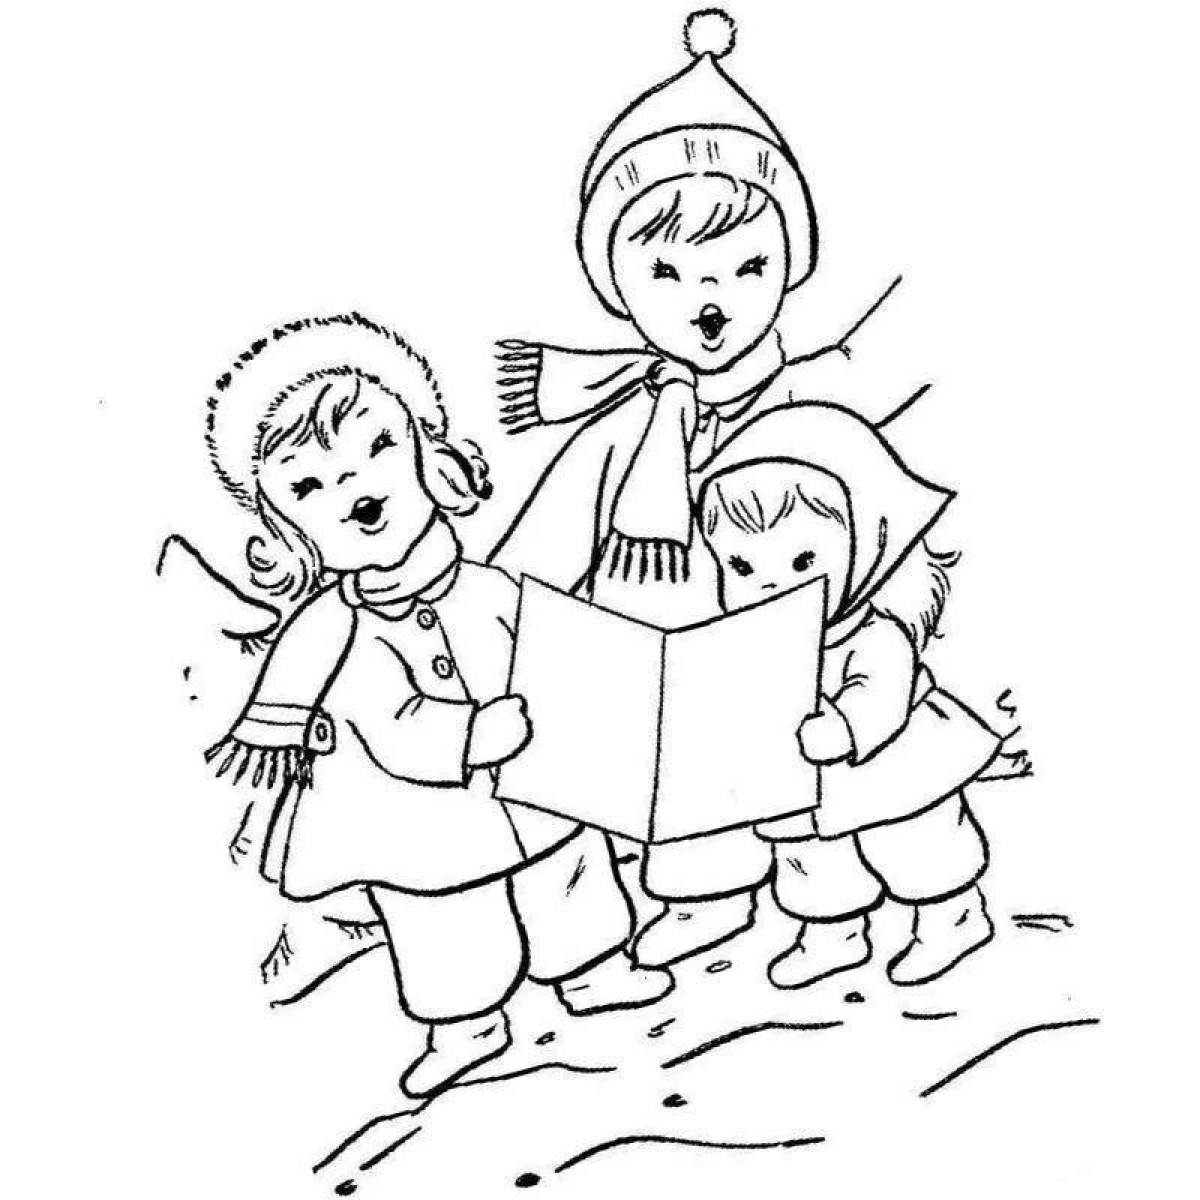 Exquisite christmas coloring page